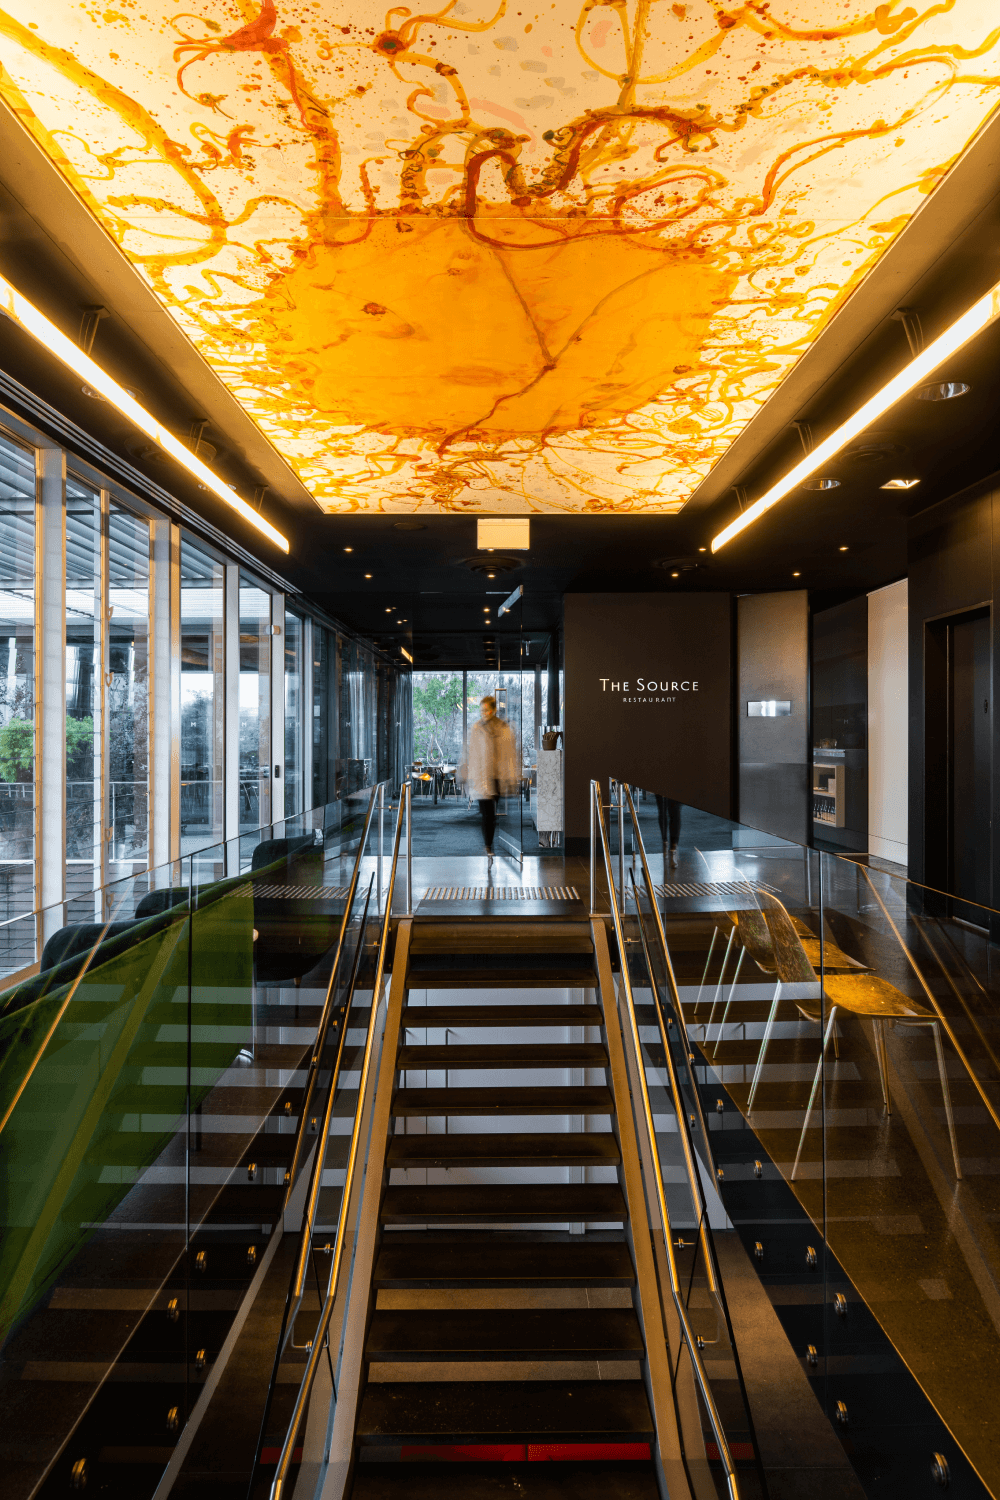 The entrance of the Source restaurant, featuring a staircase and a large abstract painting of the sun, illuminated from above.